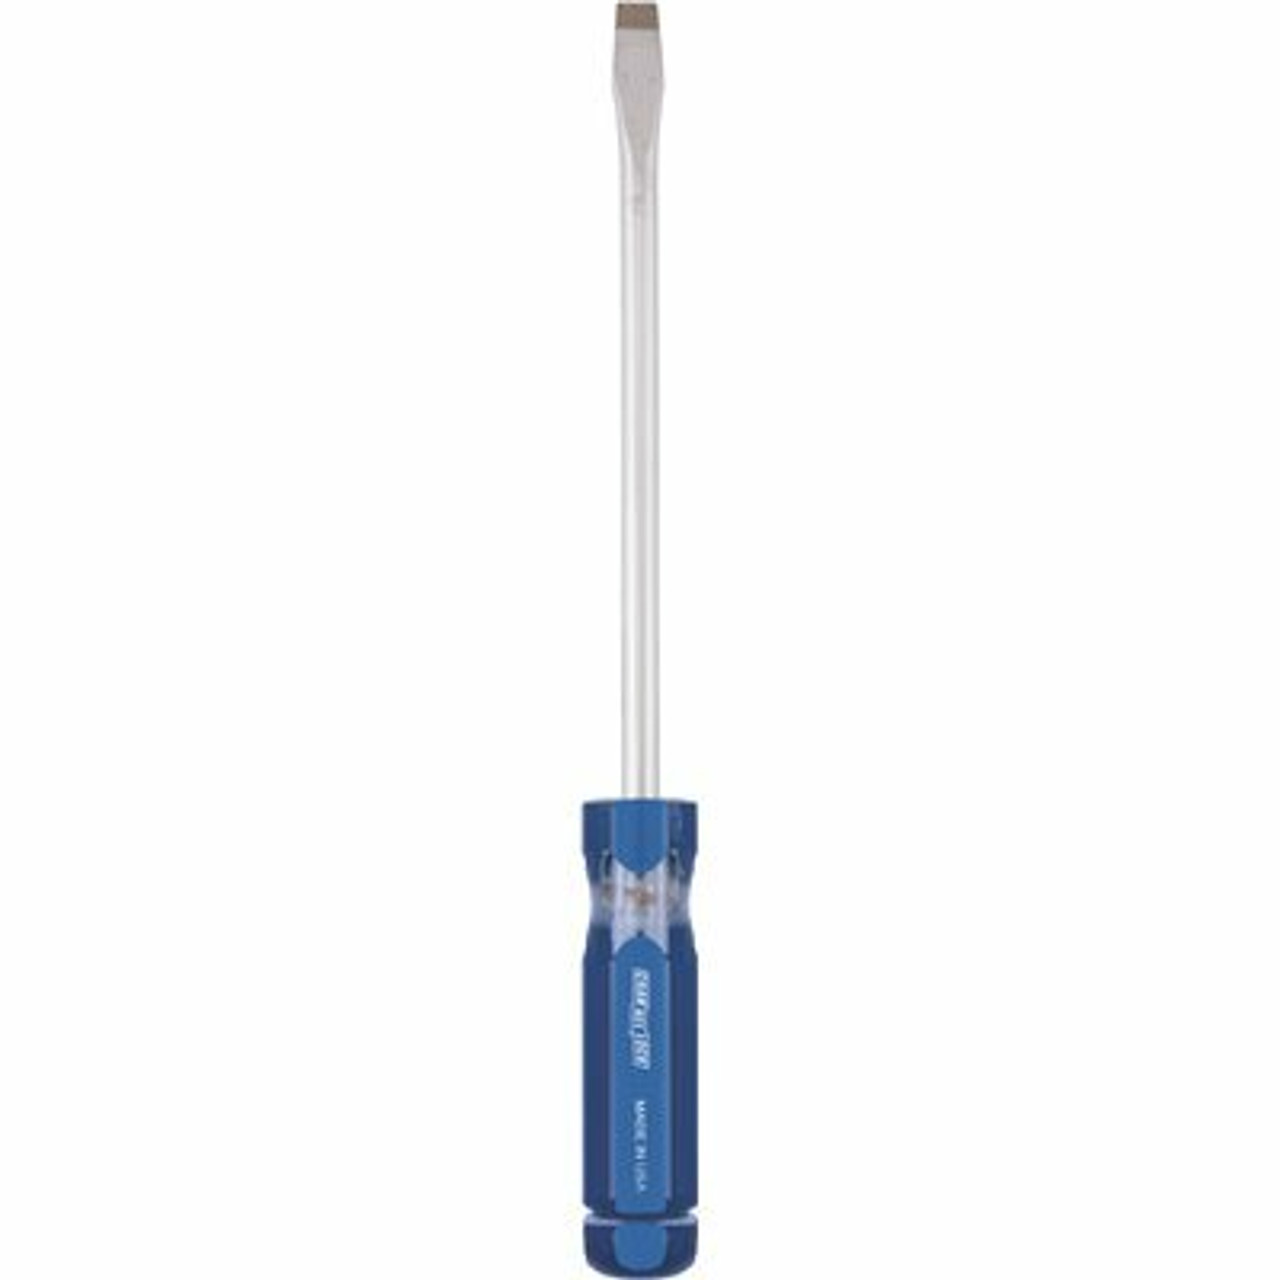 Channellock 3/8 In. Acetate Handle Slotted Screwdriver With 8 In. Shaft